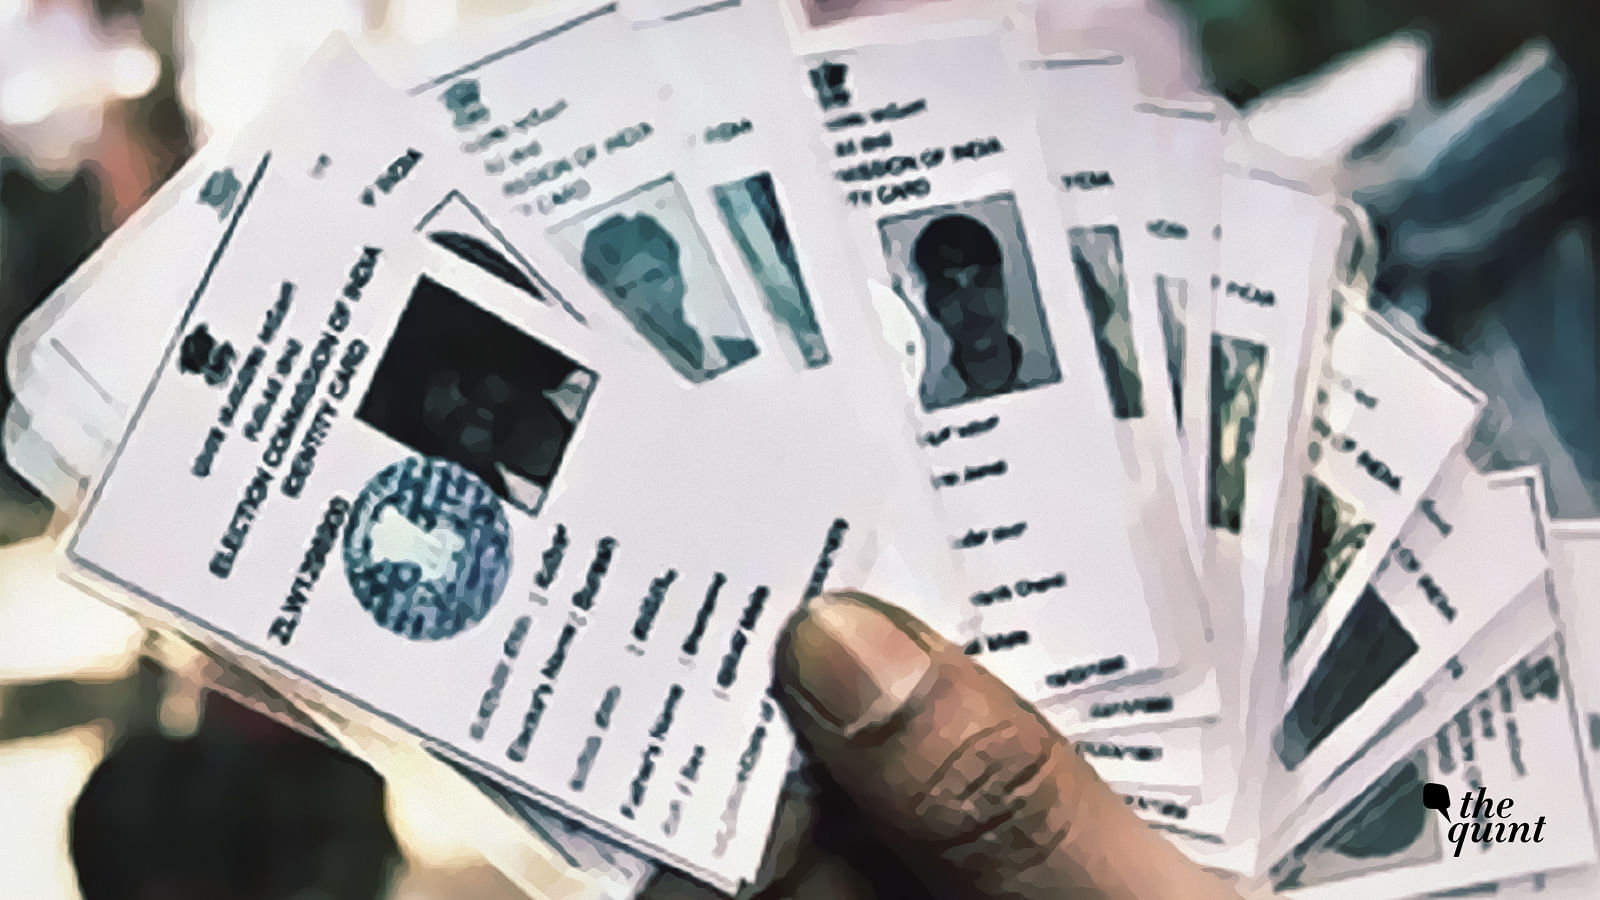 Over 9,746 voter IDs were found in a Bengaluru flat on 8 May.